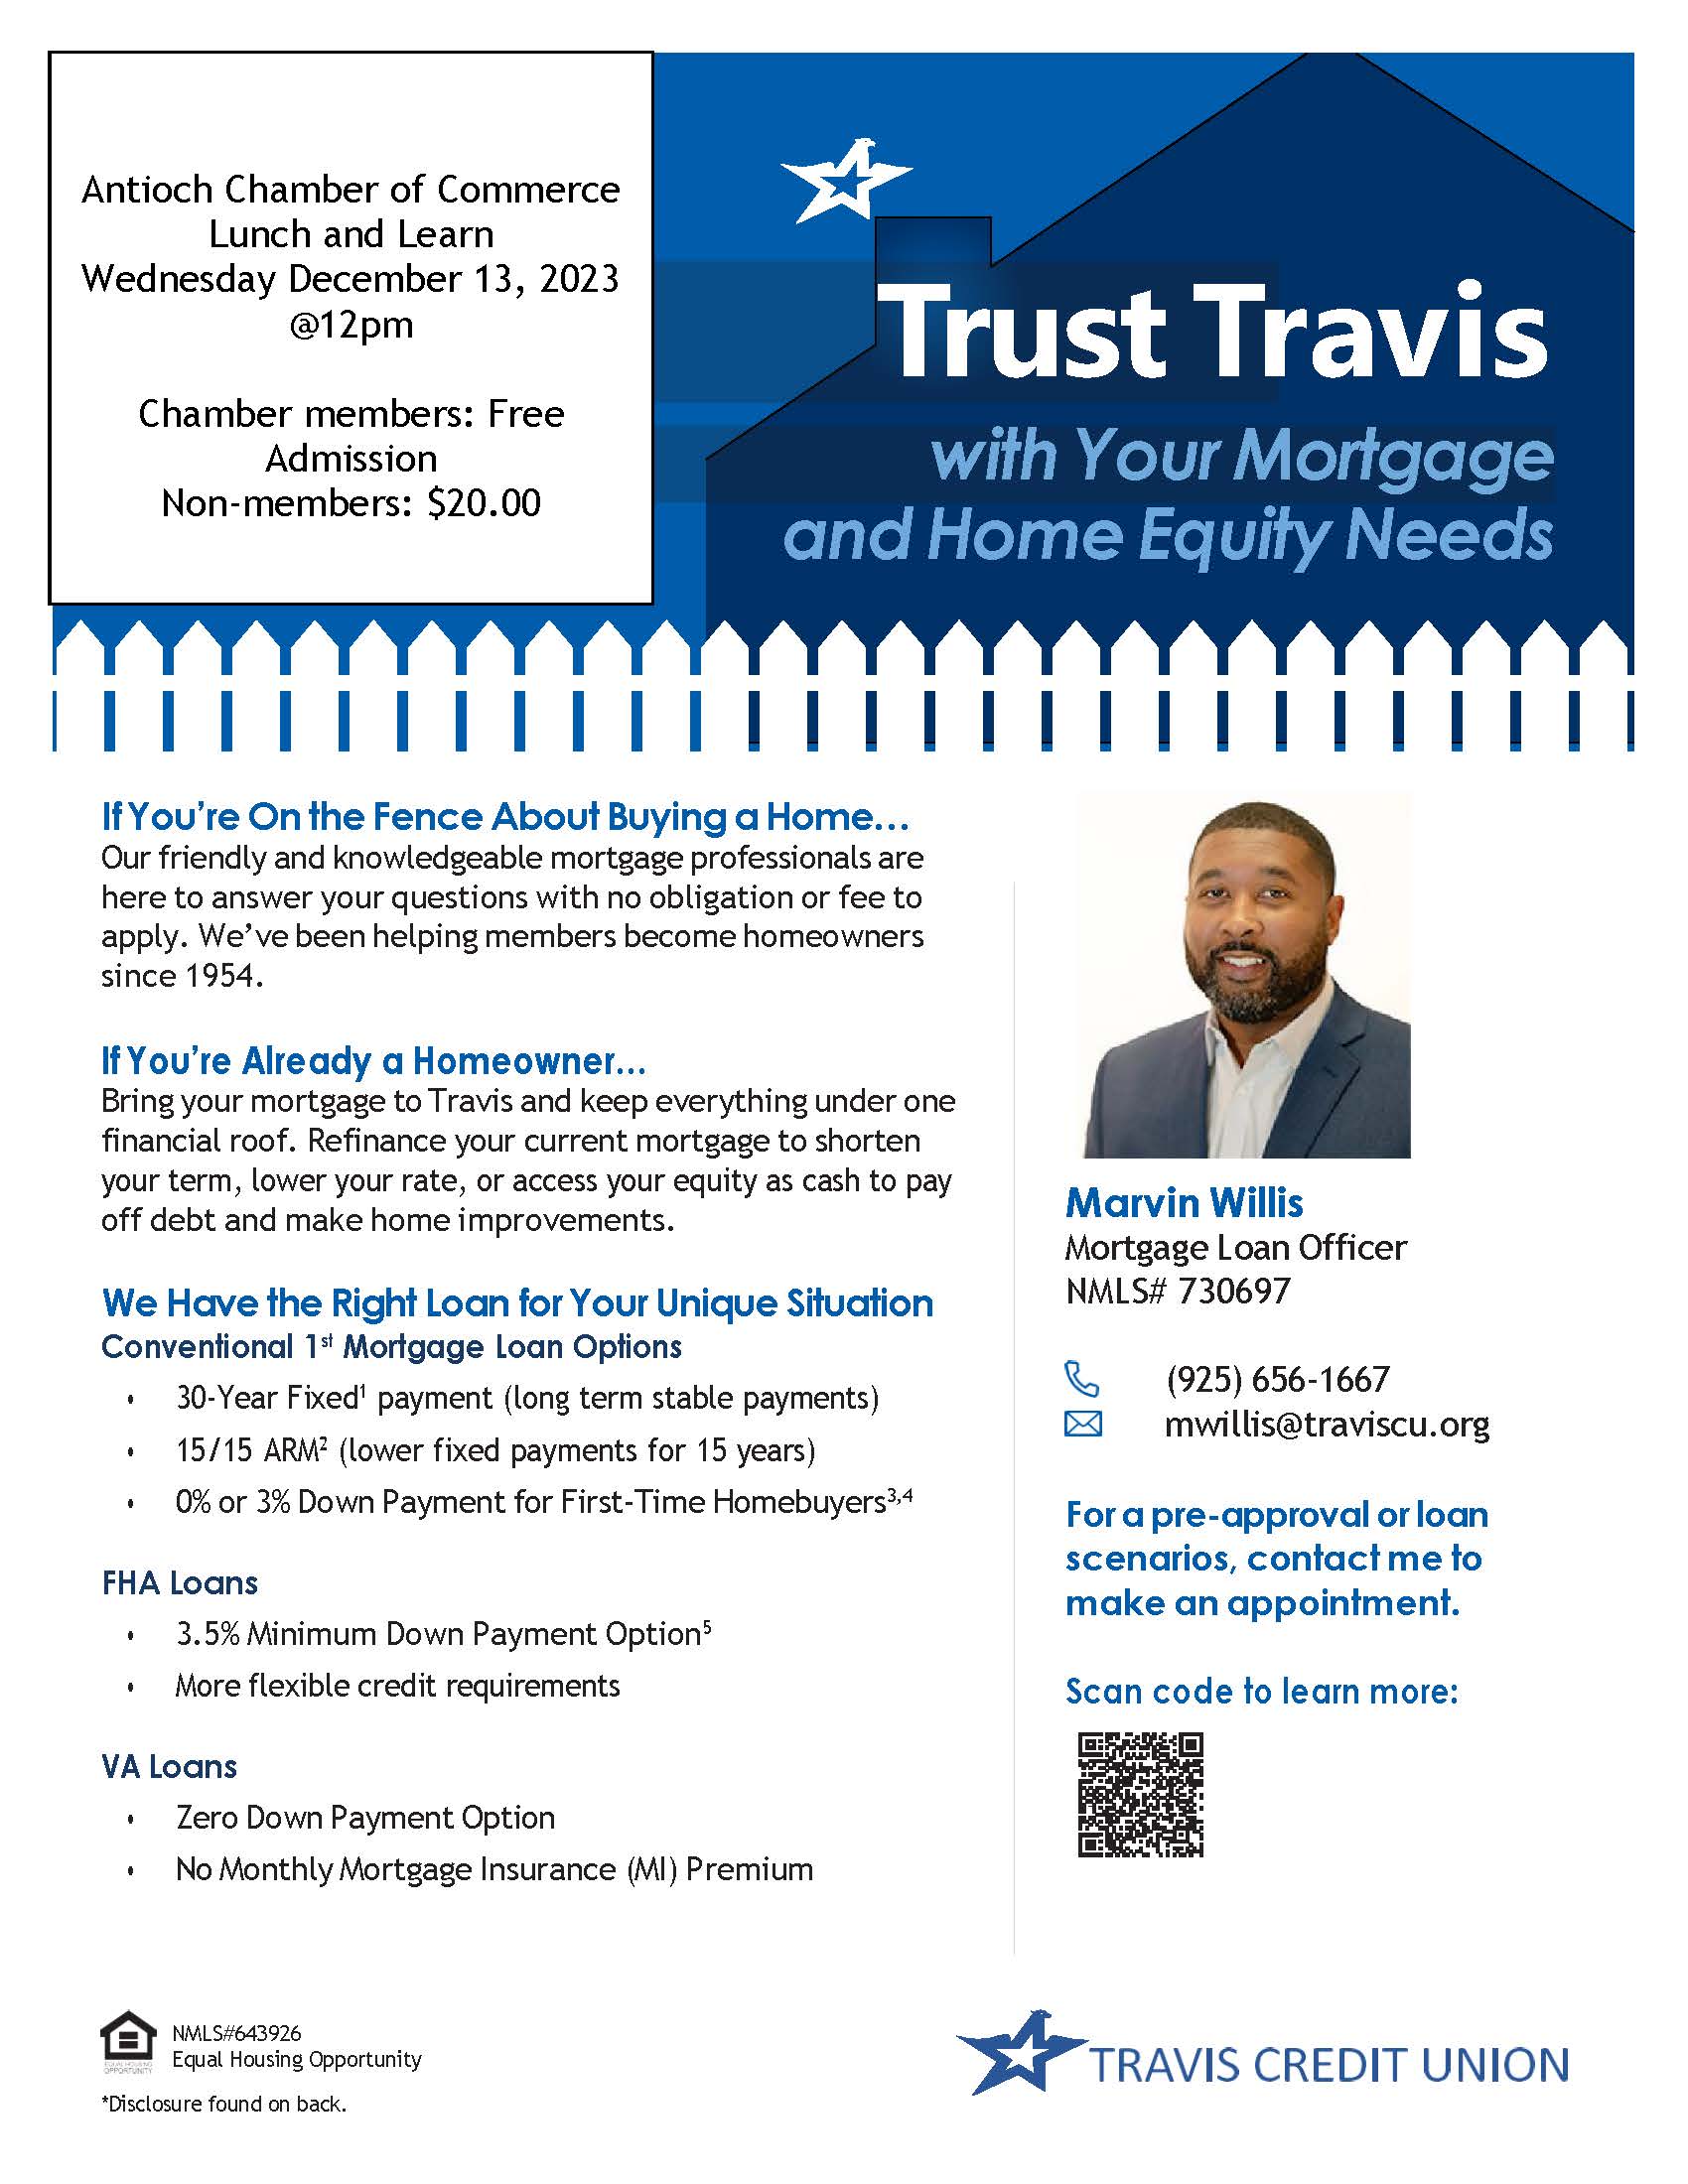 TRAVIS CREDIT UNION LUNCH AND LEARN_Page_1